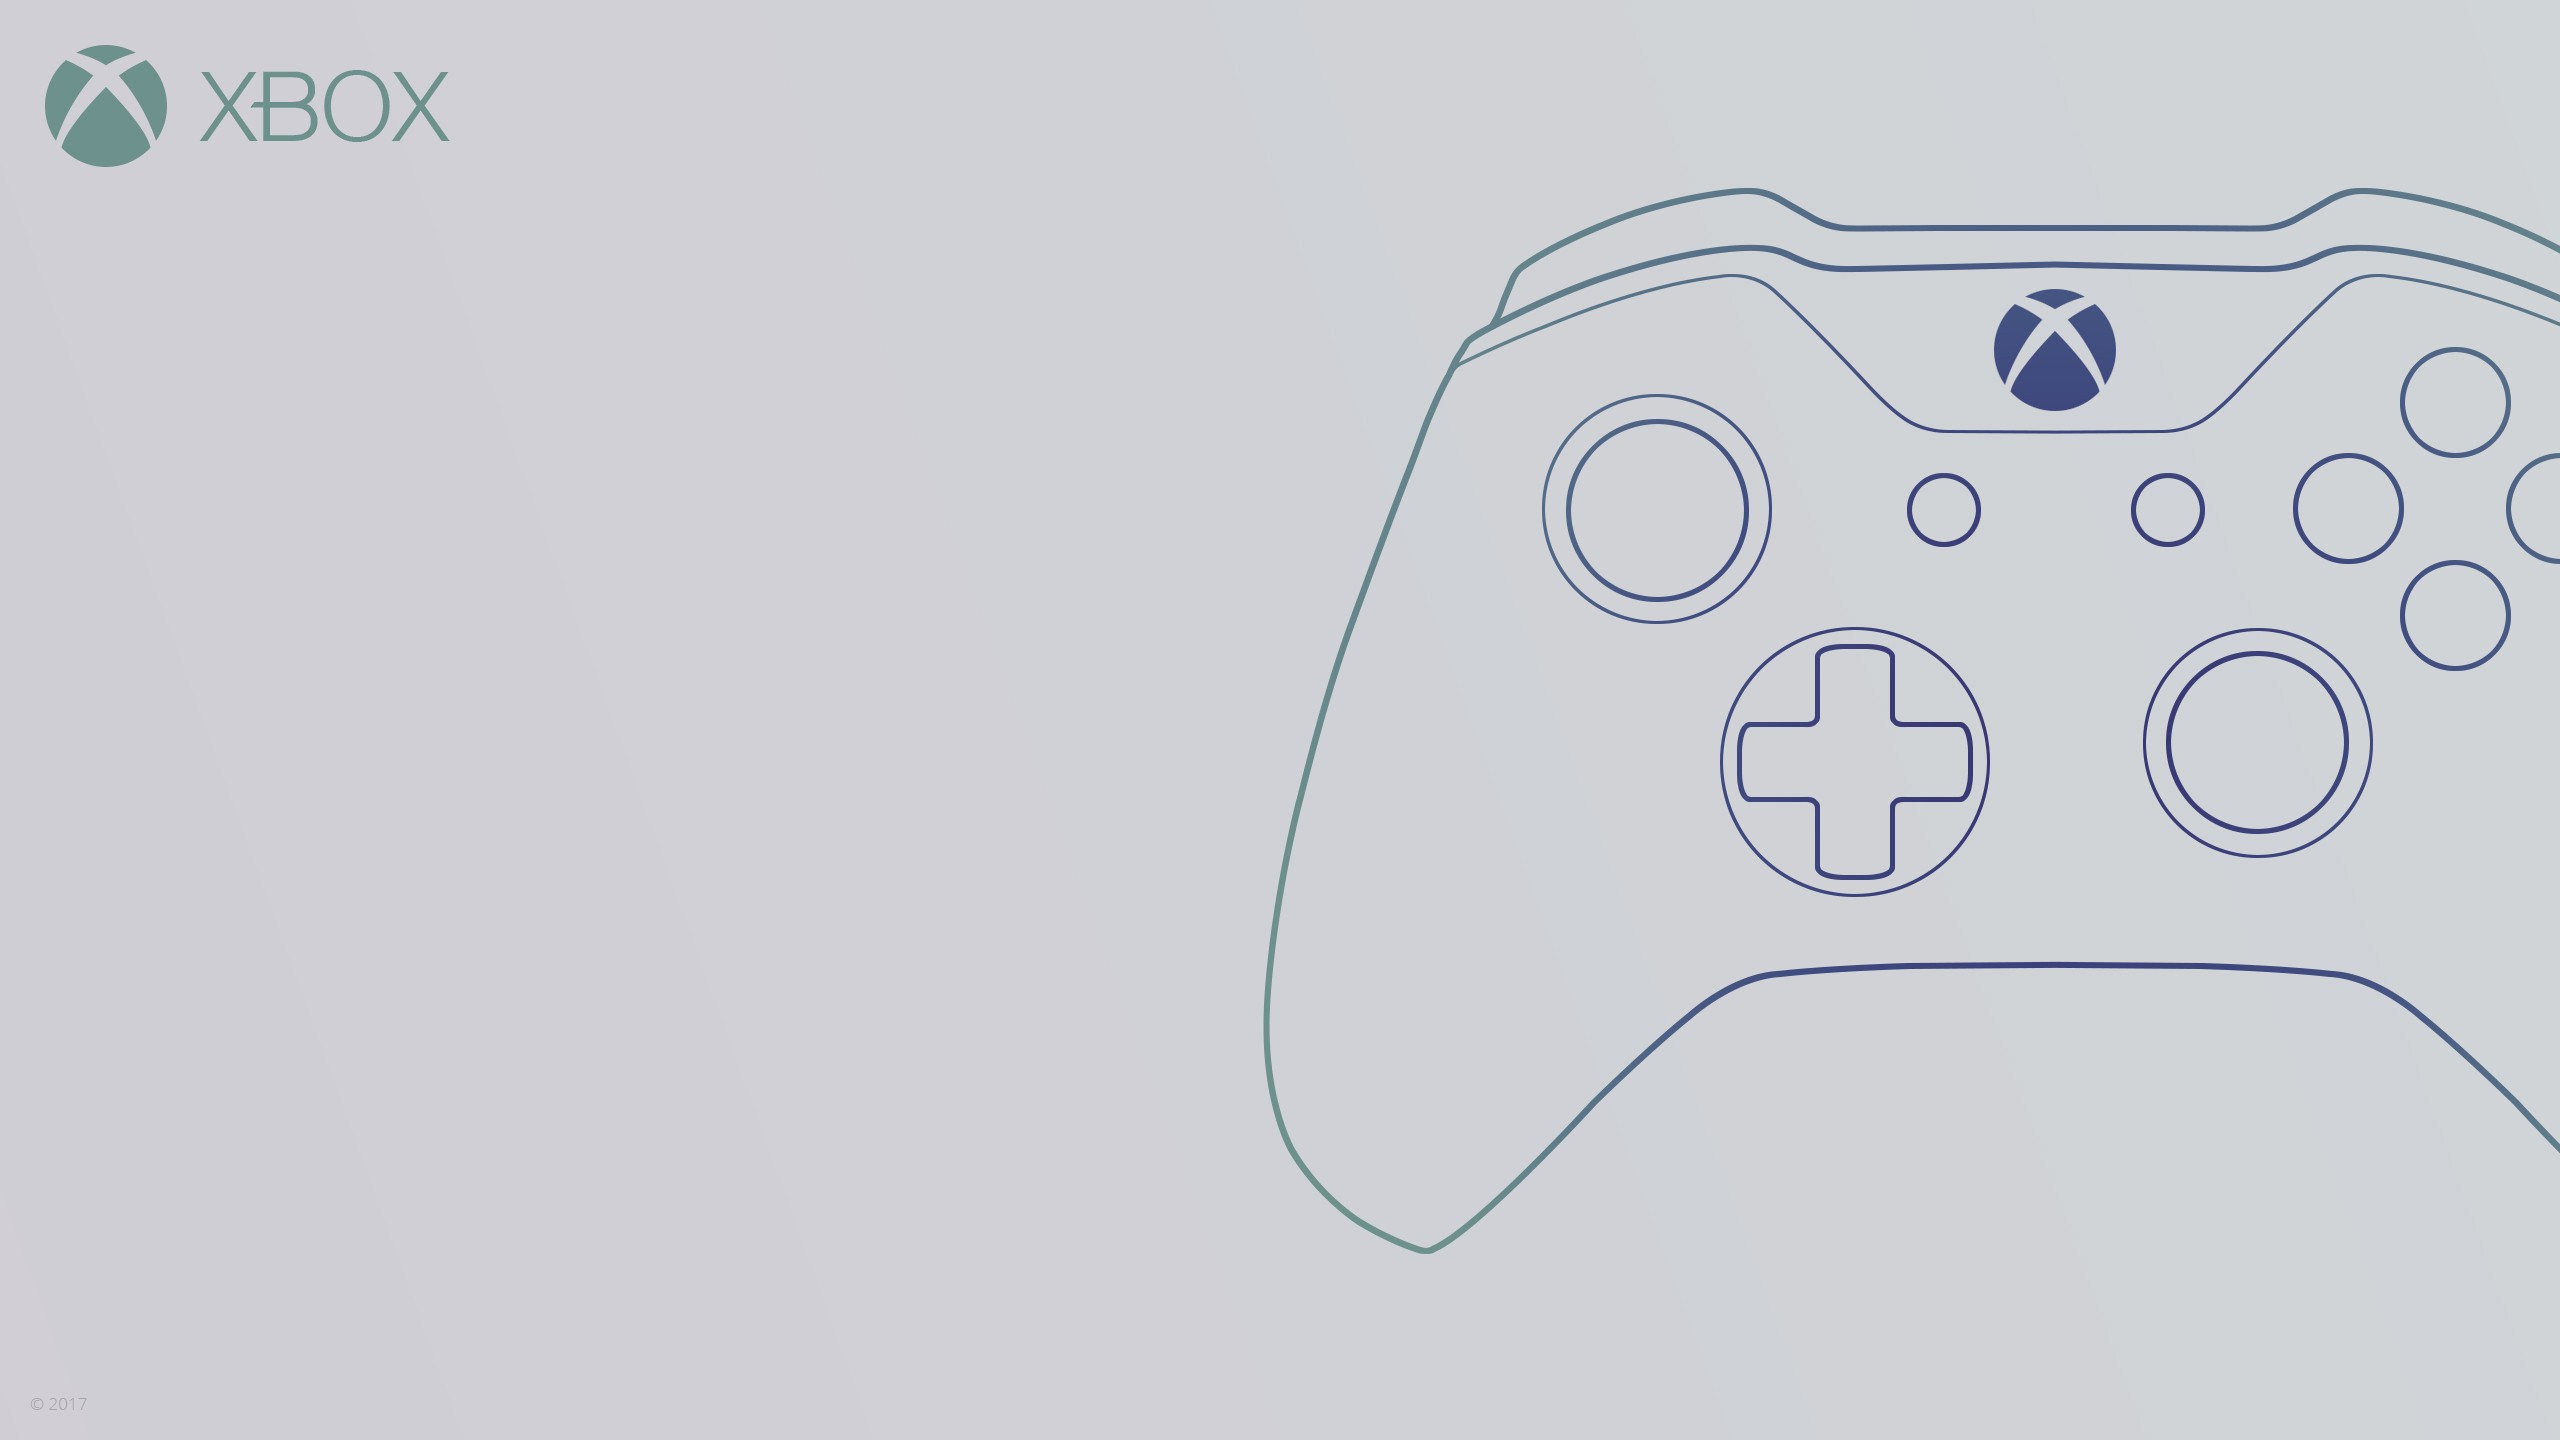 Xbox, Consoles, Controllers, Line art, Minimalism, Video games Wallpaper